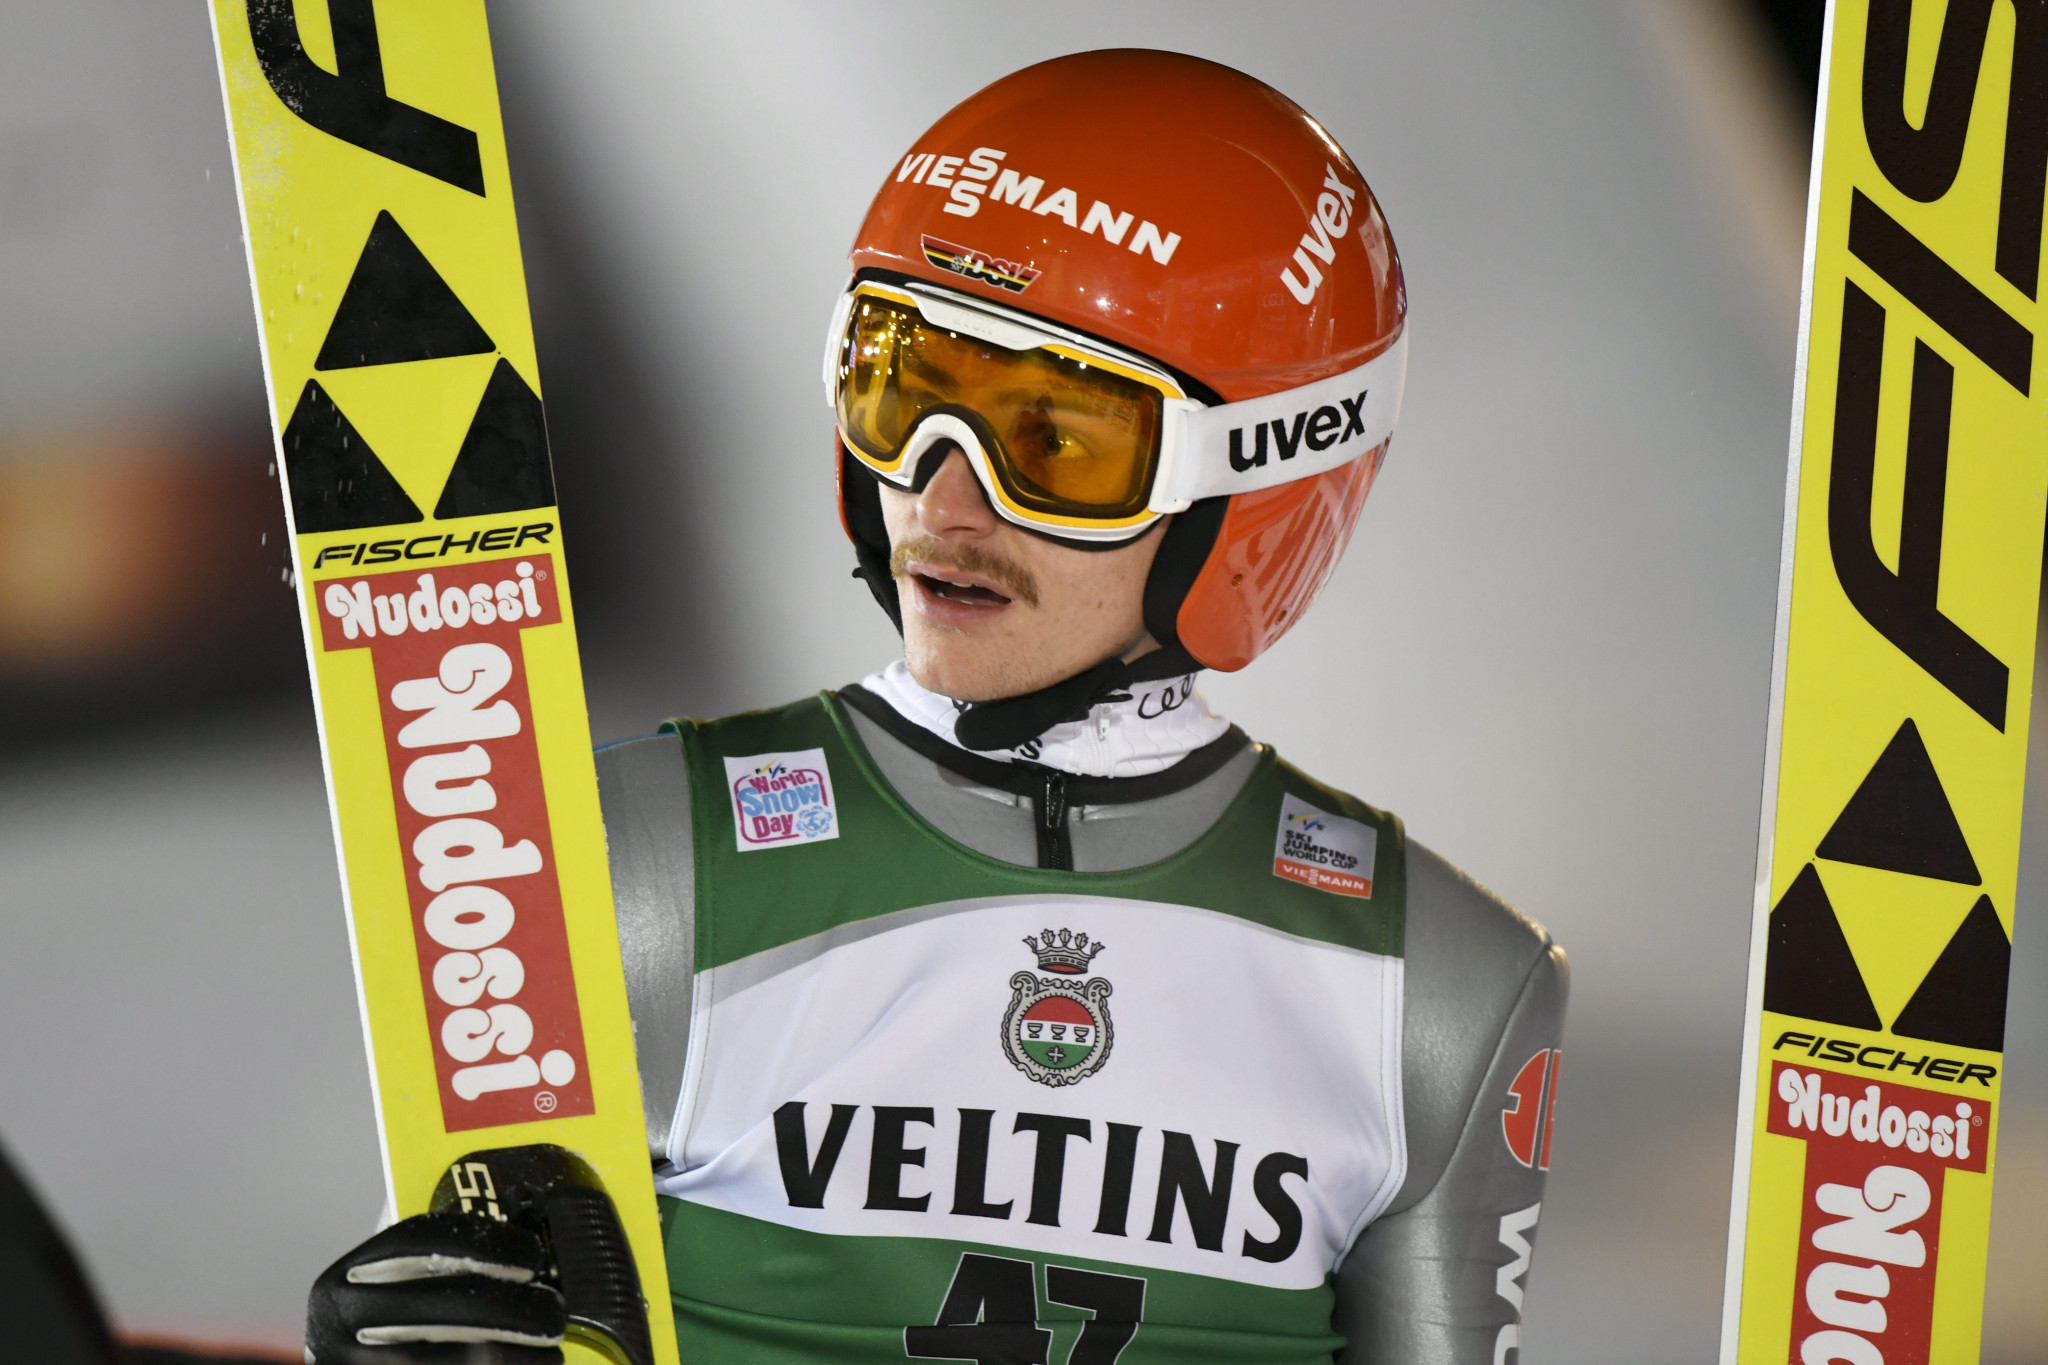 Freitag and Althaus take victory on dominant day for Germany at FIS Ski Jumping World Cup